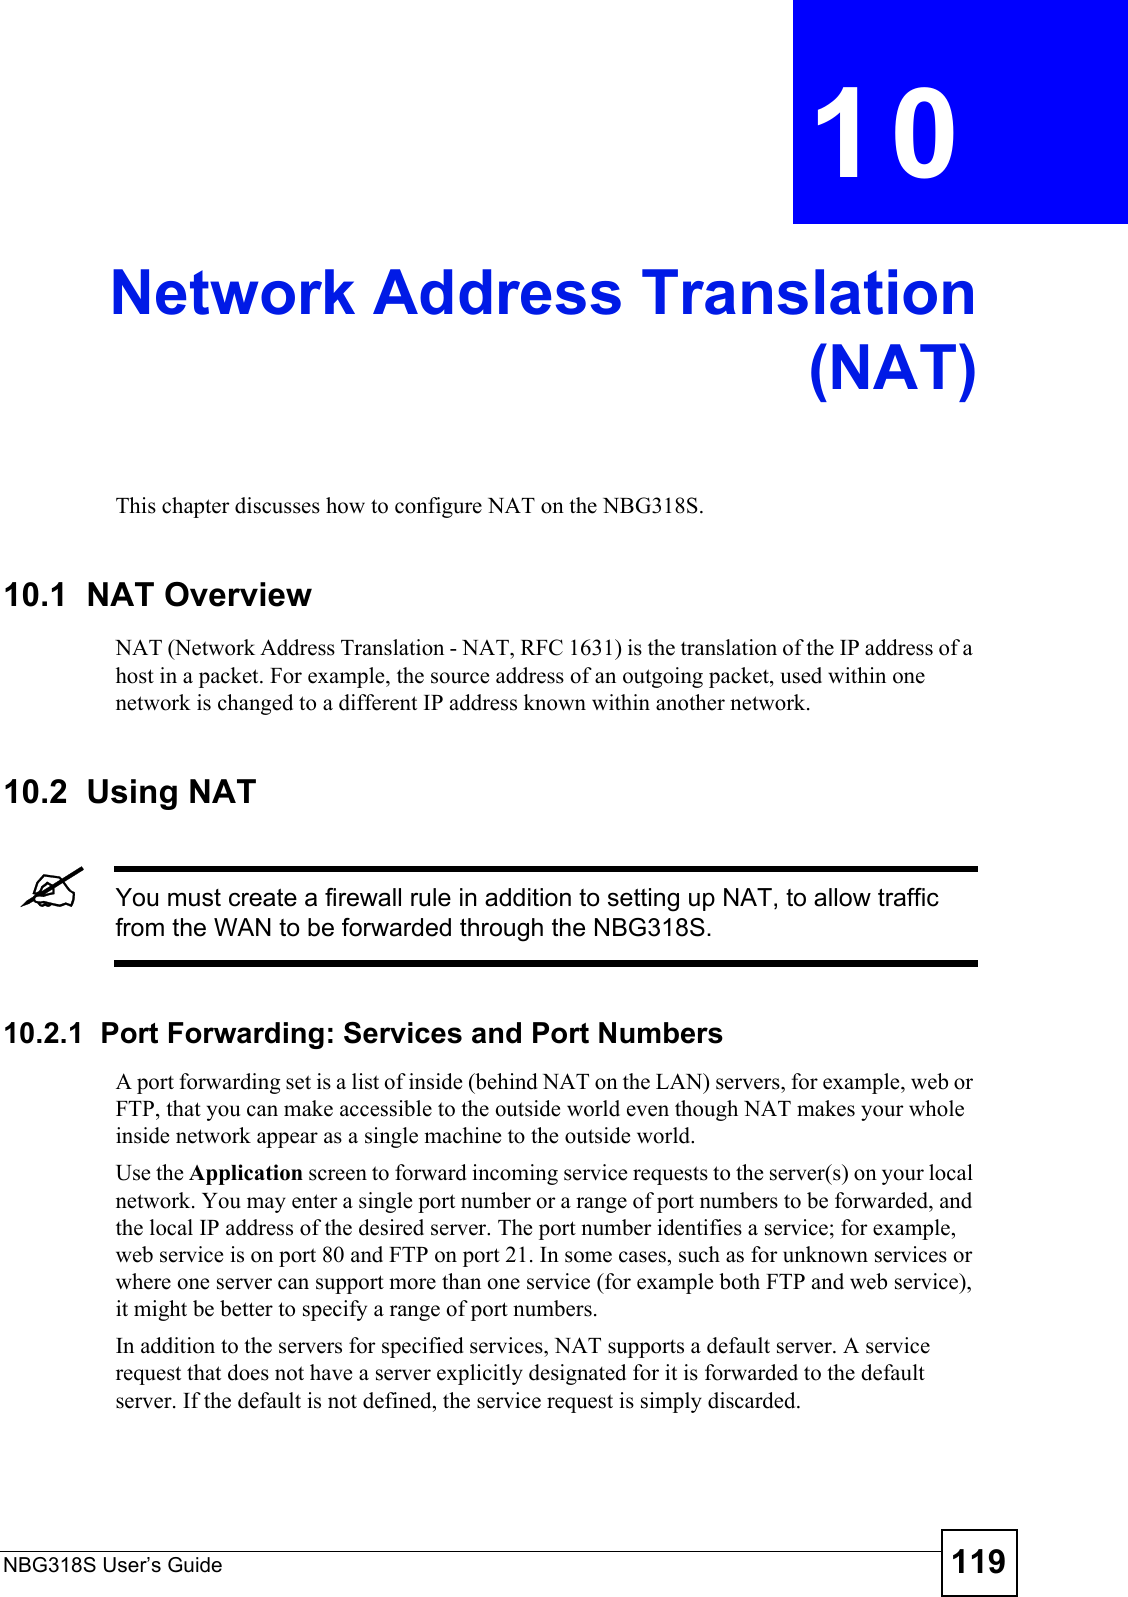 NBG318S User’s Guide 119CHAPTER  10 Network Address Translation(NAT)This chapter discusses how to configure NAT on the NBG318S.10.1  NAT Overview   NAT (Network Address Translation - NAT, RFC 1631) is the translation of the IP address of a host in a packet. For example, the source address of an outgoing packet, used within one network is changed to a different IP address known within another network.10.2  Using NAT&quot;You must create a firewall rule in addition to setting up NAT, to allow traffic from the WAN to be forwarded through the NBG318S.10.2.1  Port Forwarding: Services and Port NumbersA port forwarding set is a list of inside (behind NAT on the LAN) servers, for example, web or FTP, that you can make accessible to the outside world even though NAT makes your whole inside network appear as a single machine to the outside world. Use the Application screen to forward incoming service requests to the server(s) on your local network. You may enter a single port number or a range of port numbers to be forwarded, and the local IP address of the desired server. The port number identifies a service; for example, web service is on port 80 and FTP on port 21. In some cases, such as for unknown services or where one server can support more than one service (for example both FTP and web service), it might be better to specify a range of port numbers.In addition to the servers for specified services, NAT supports a default server. A service request that does not have a server explicitly designated for it is forwarded to the default server. If the default is not defined, the service request is simply discarded.